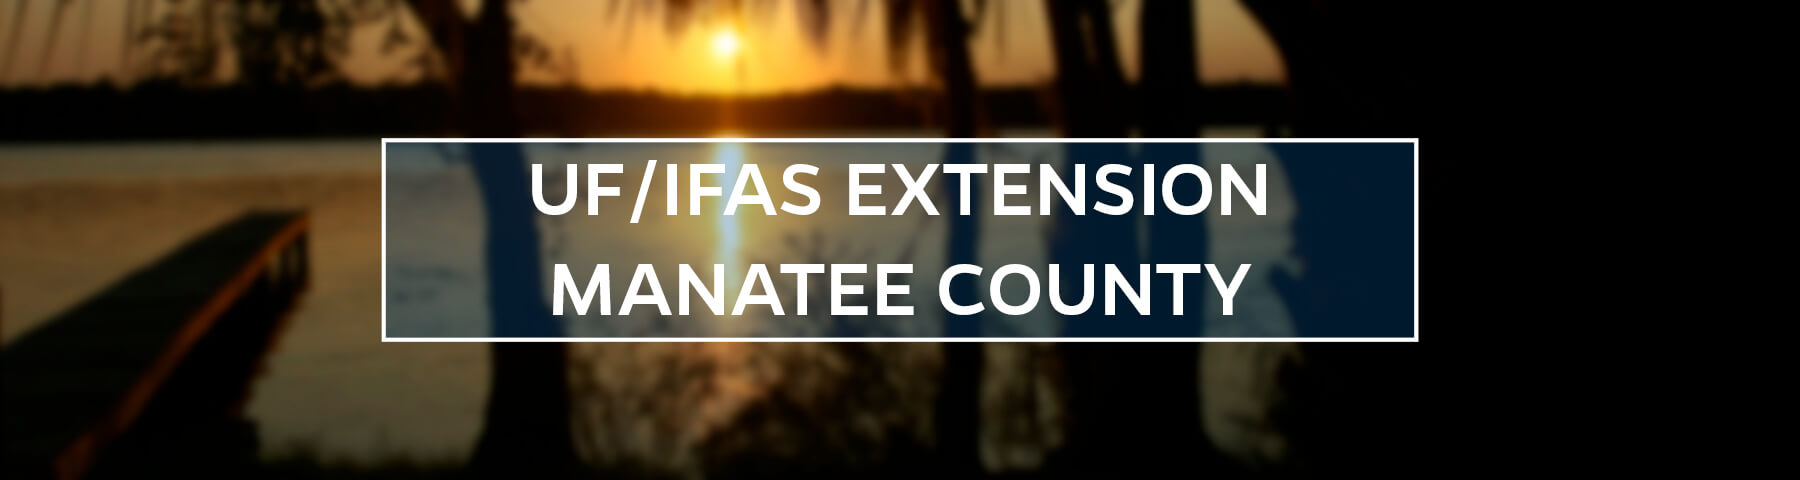 UF/IFAS Extension Manatee County